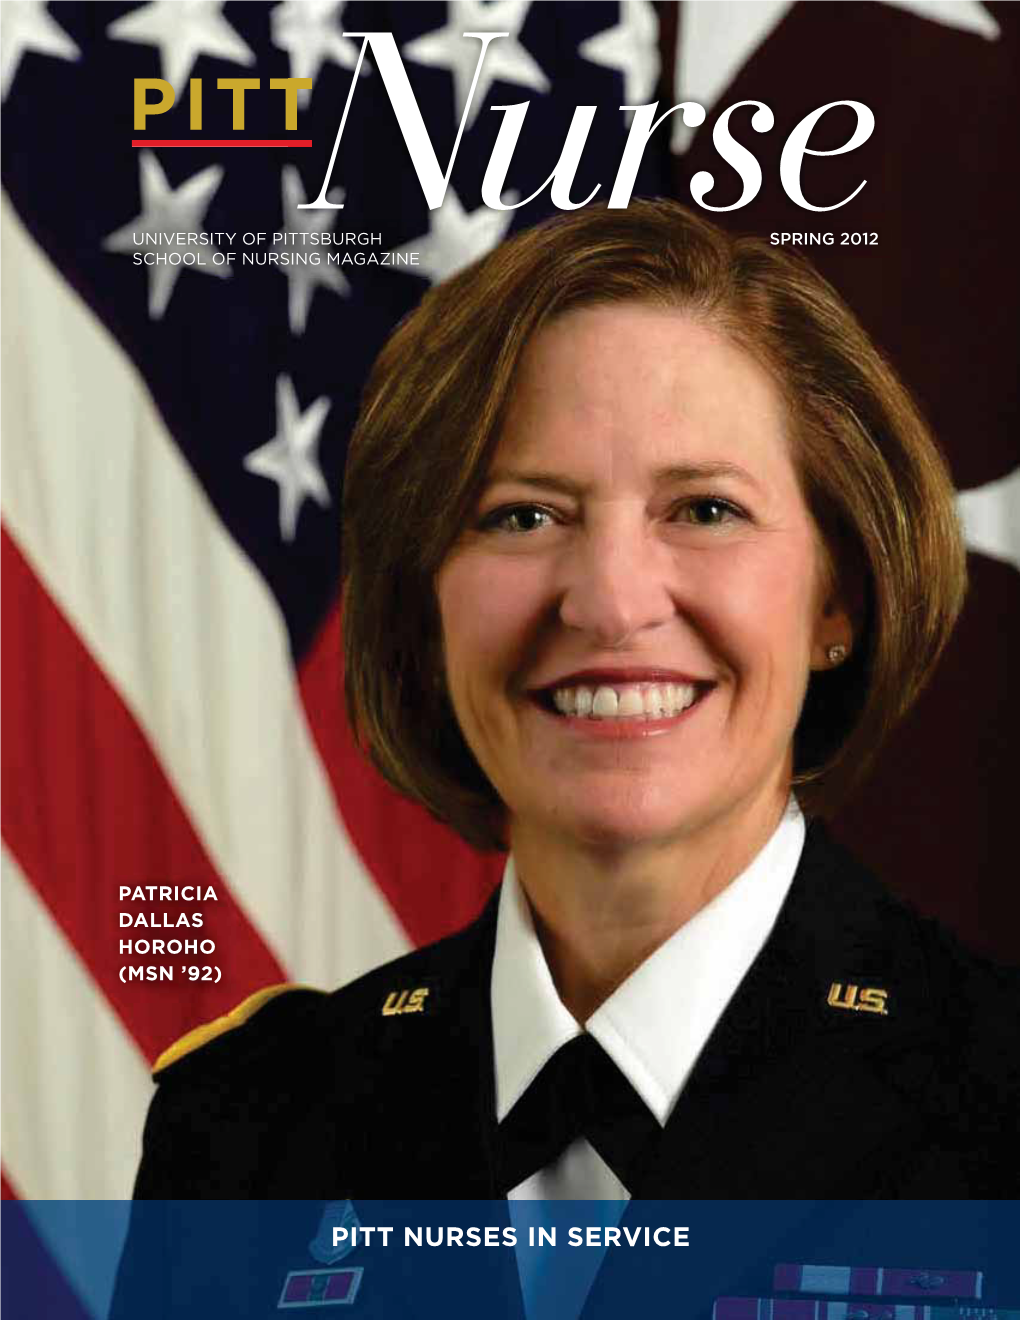 PITT NURSES in SERVICE Cover: Patricia Dallas Horoho (MSN ’92) Is the Surgeon General of the U.S